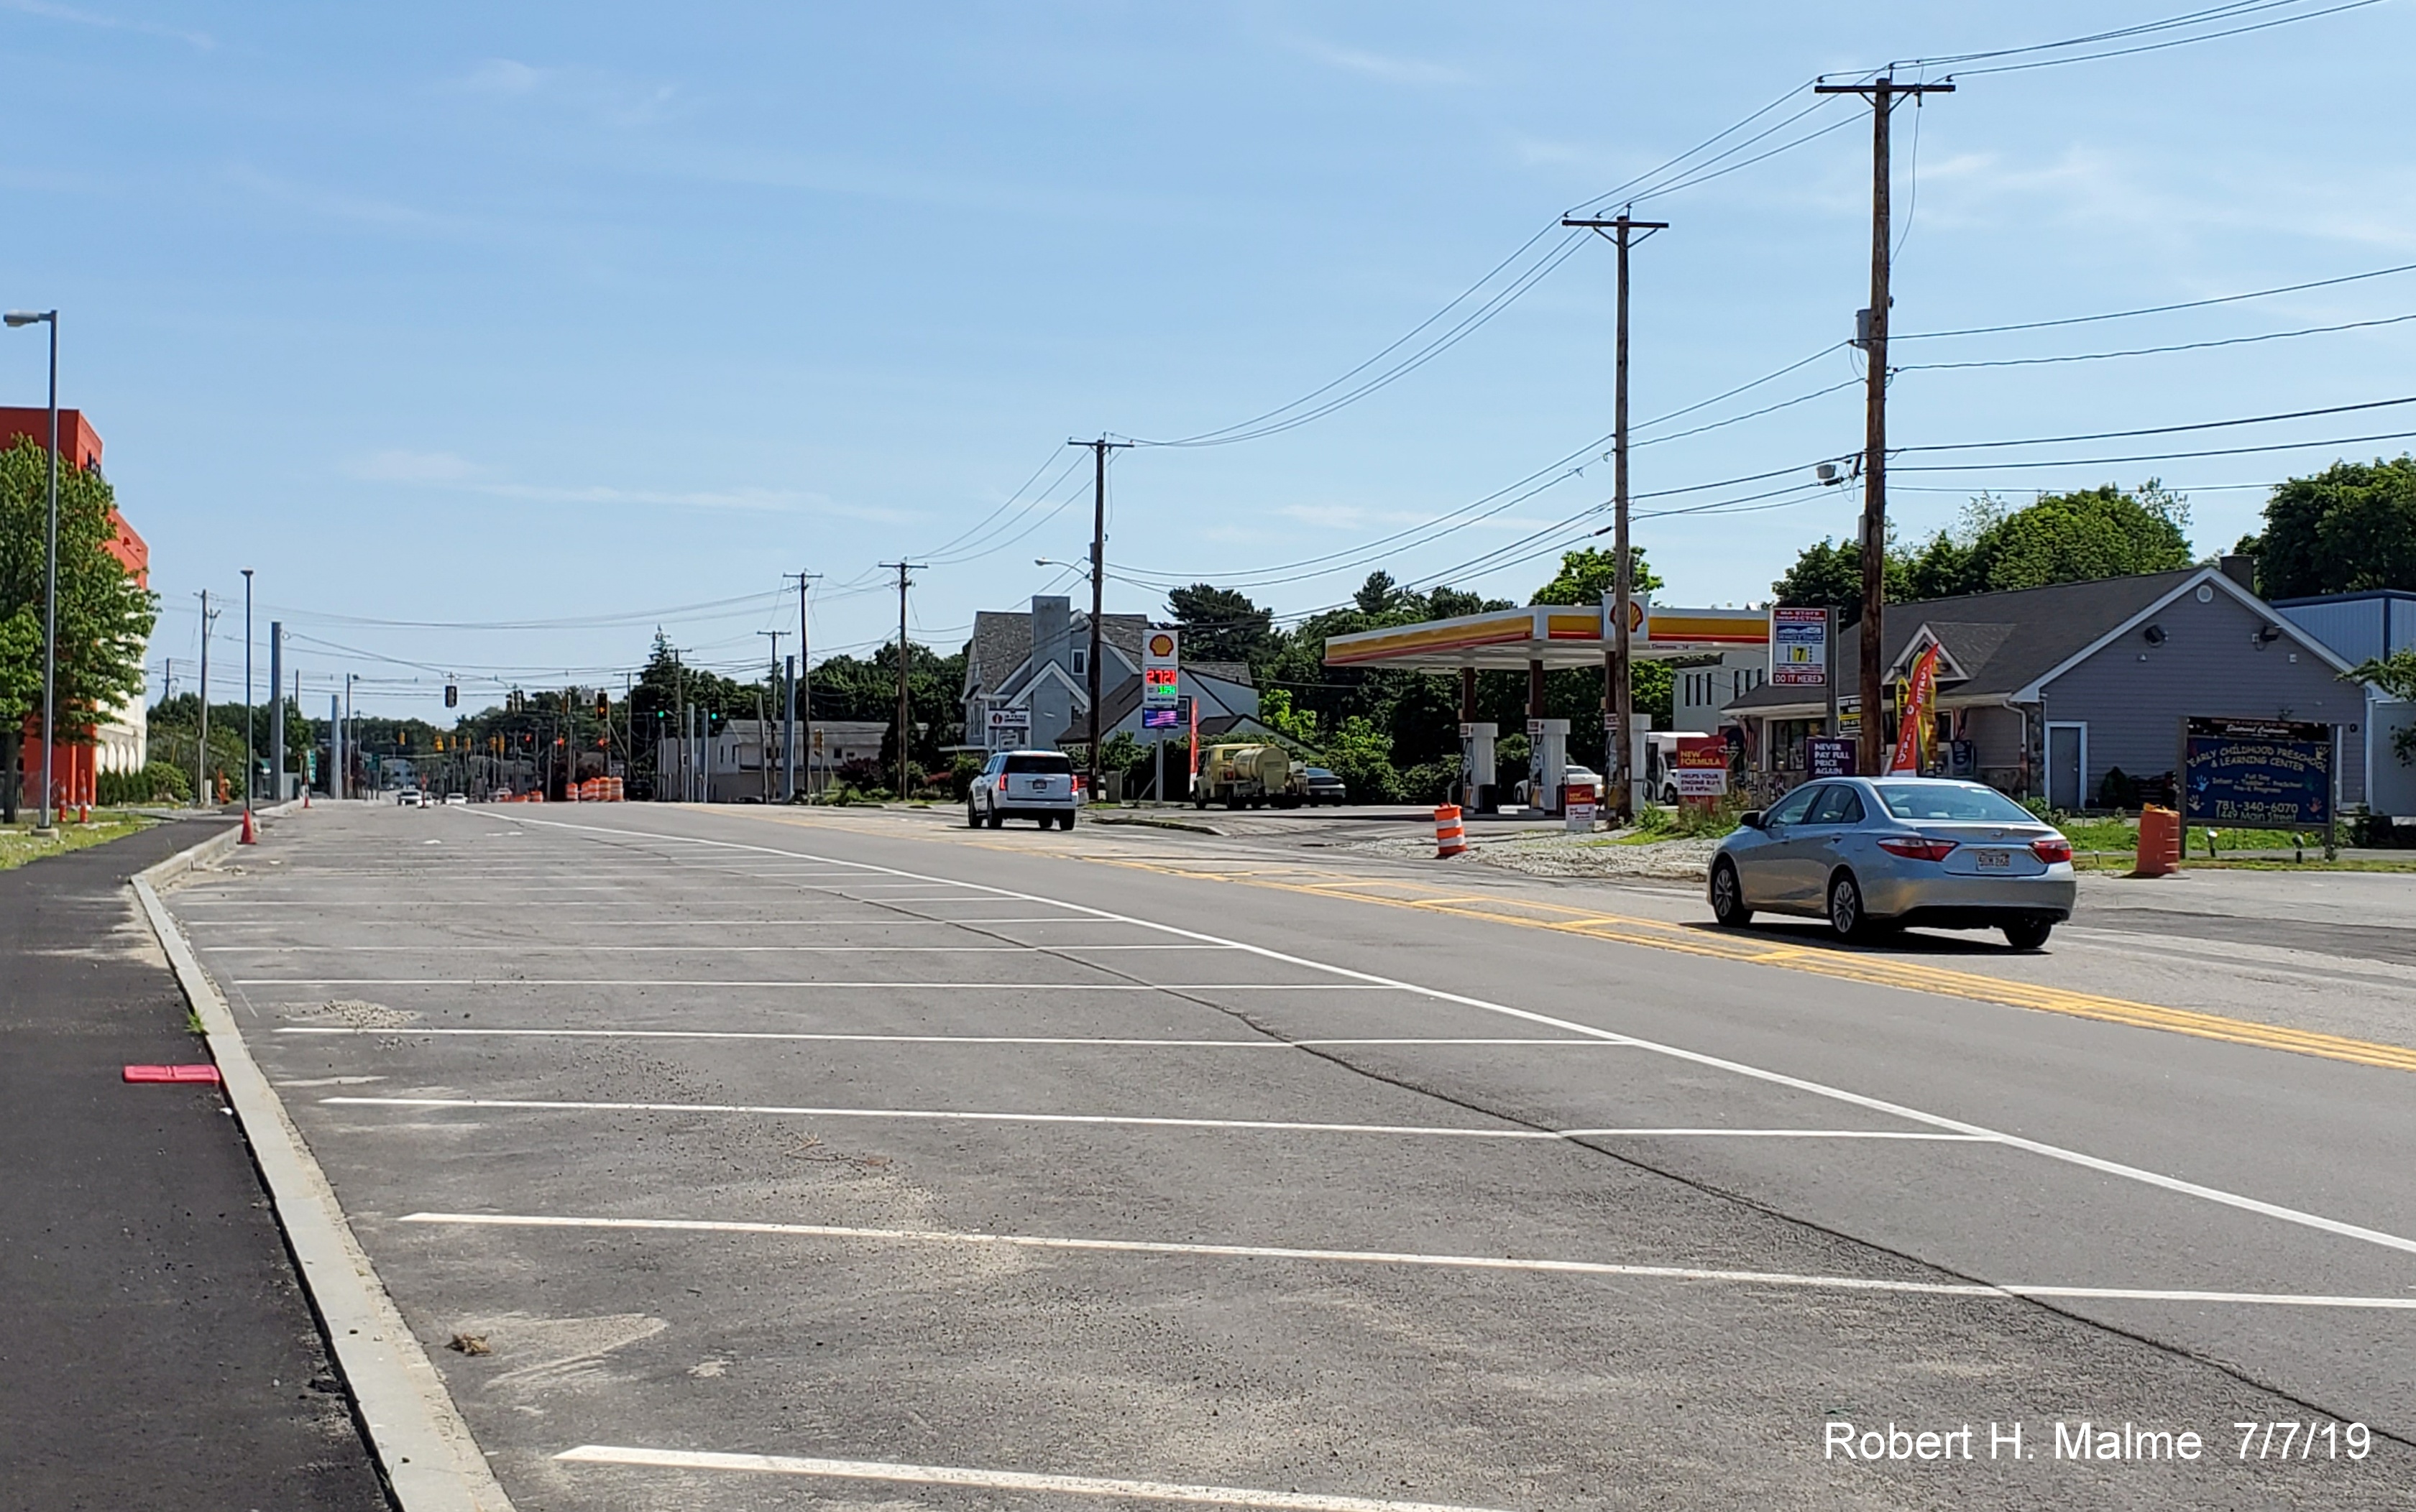 Image of completed new northbound lane for MA 18 in area of South Weymouth Commuter Rail Station in July 2019